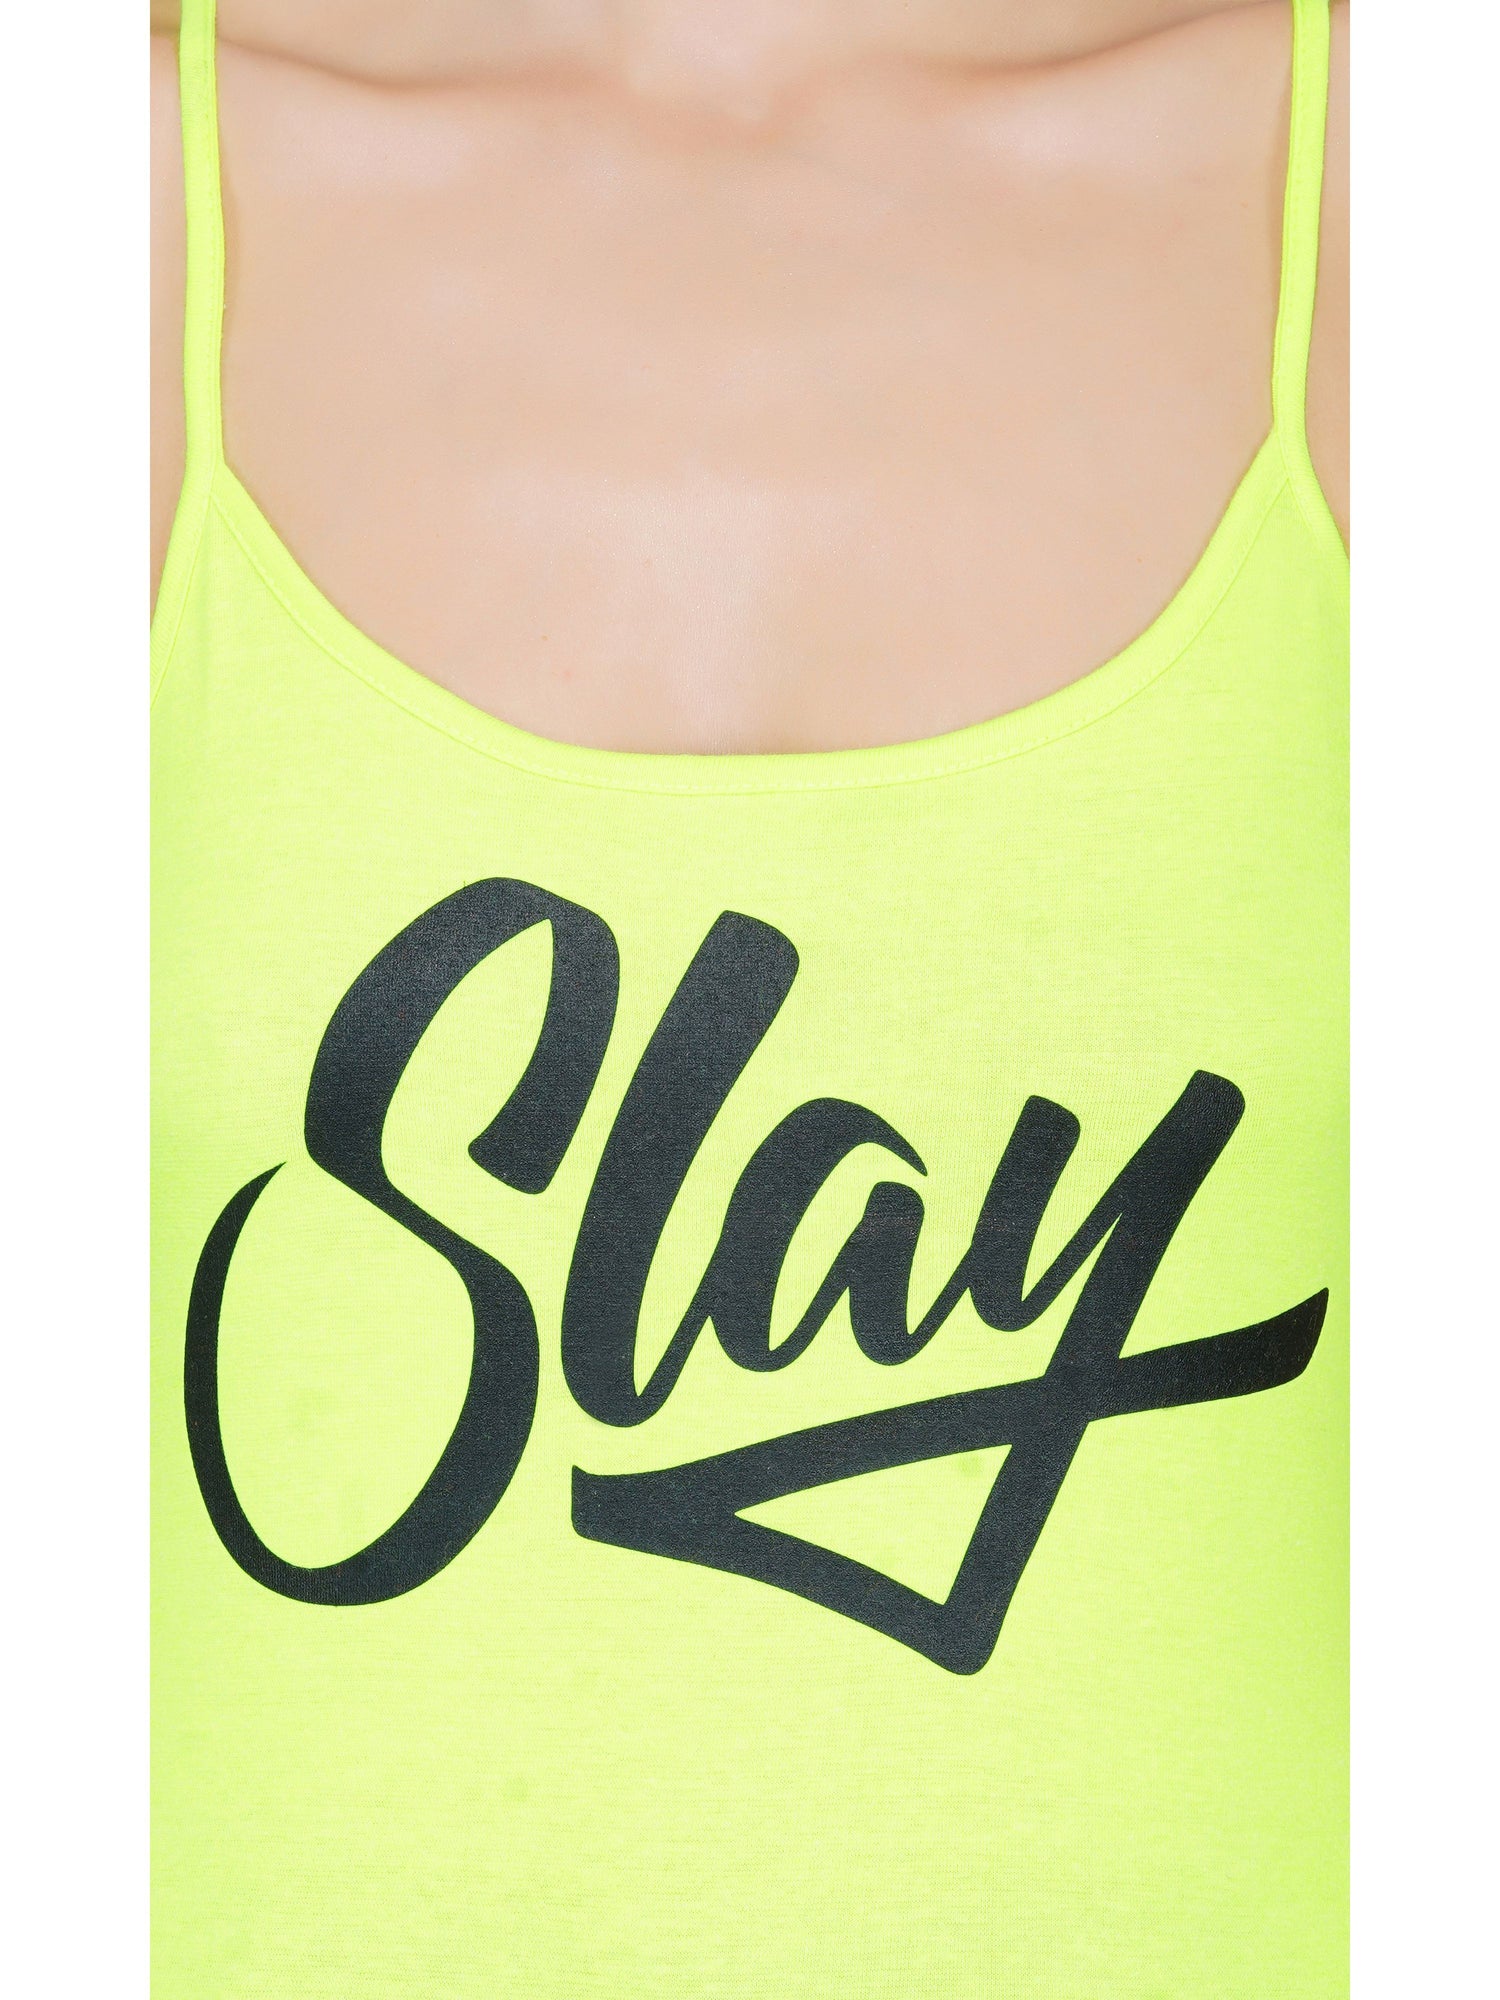 SLAY. Women's Neon Green Printed Camisole-clothing-to-slay.myshopify.com-Camisole Top